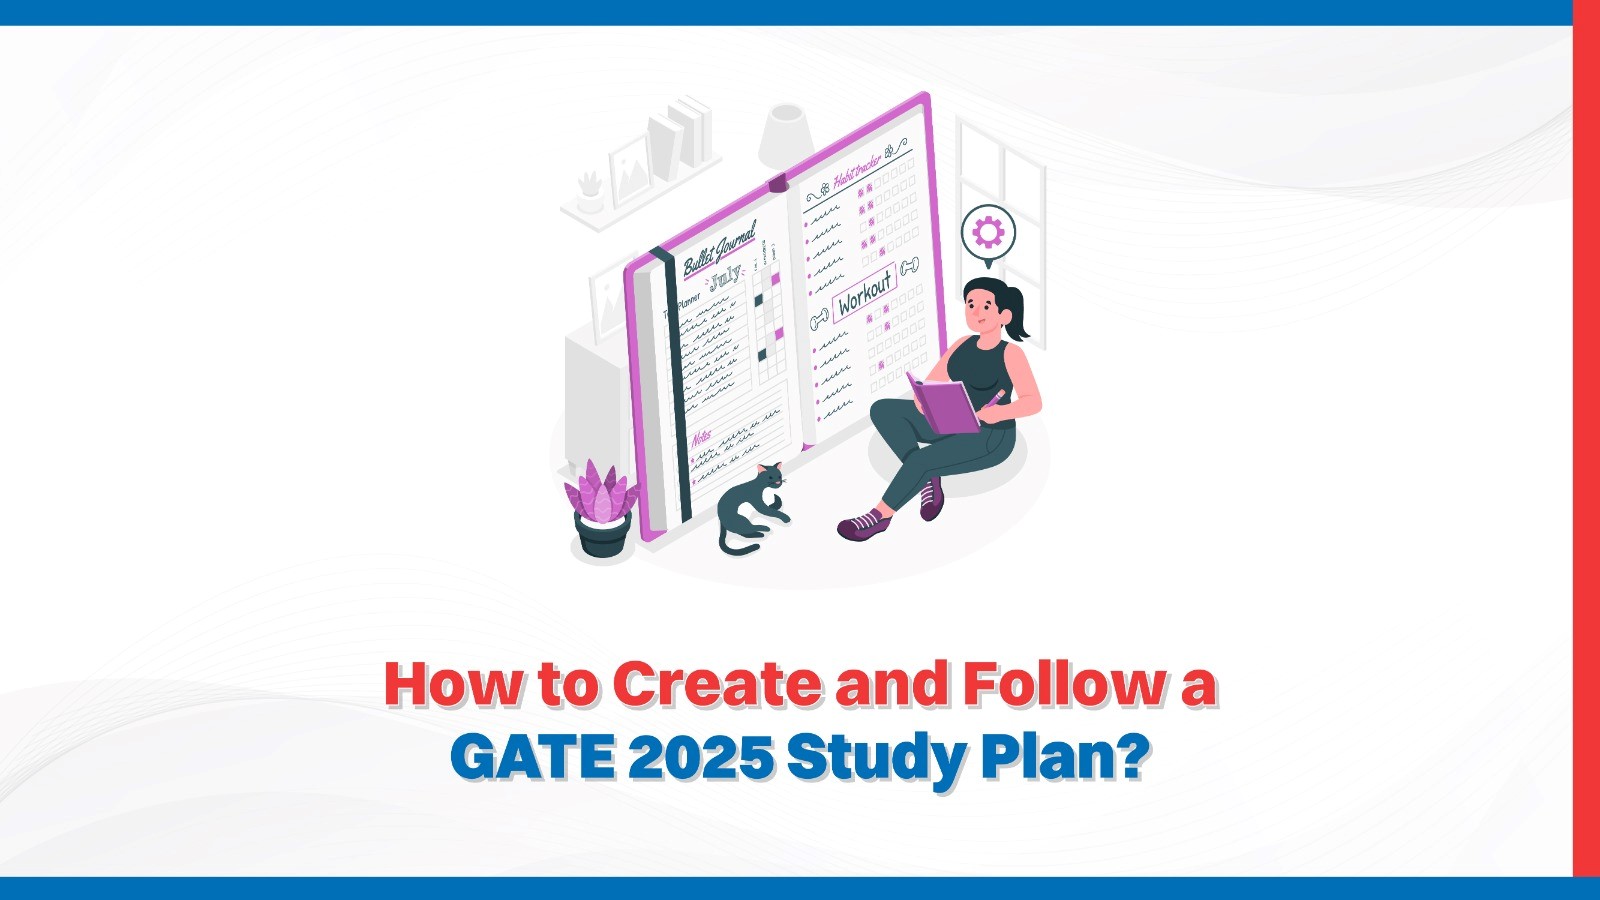 How to Create and Follow a GATE 2025 Study Plan.jpg